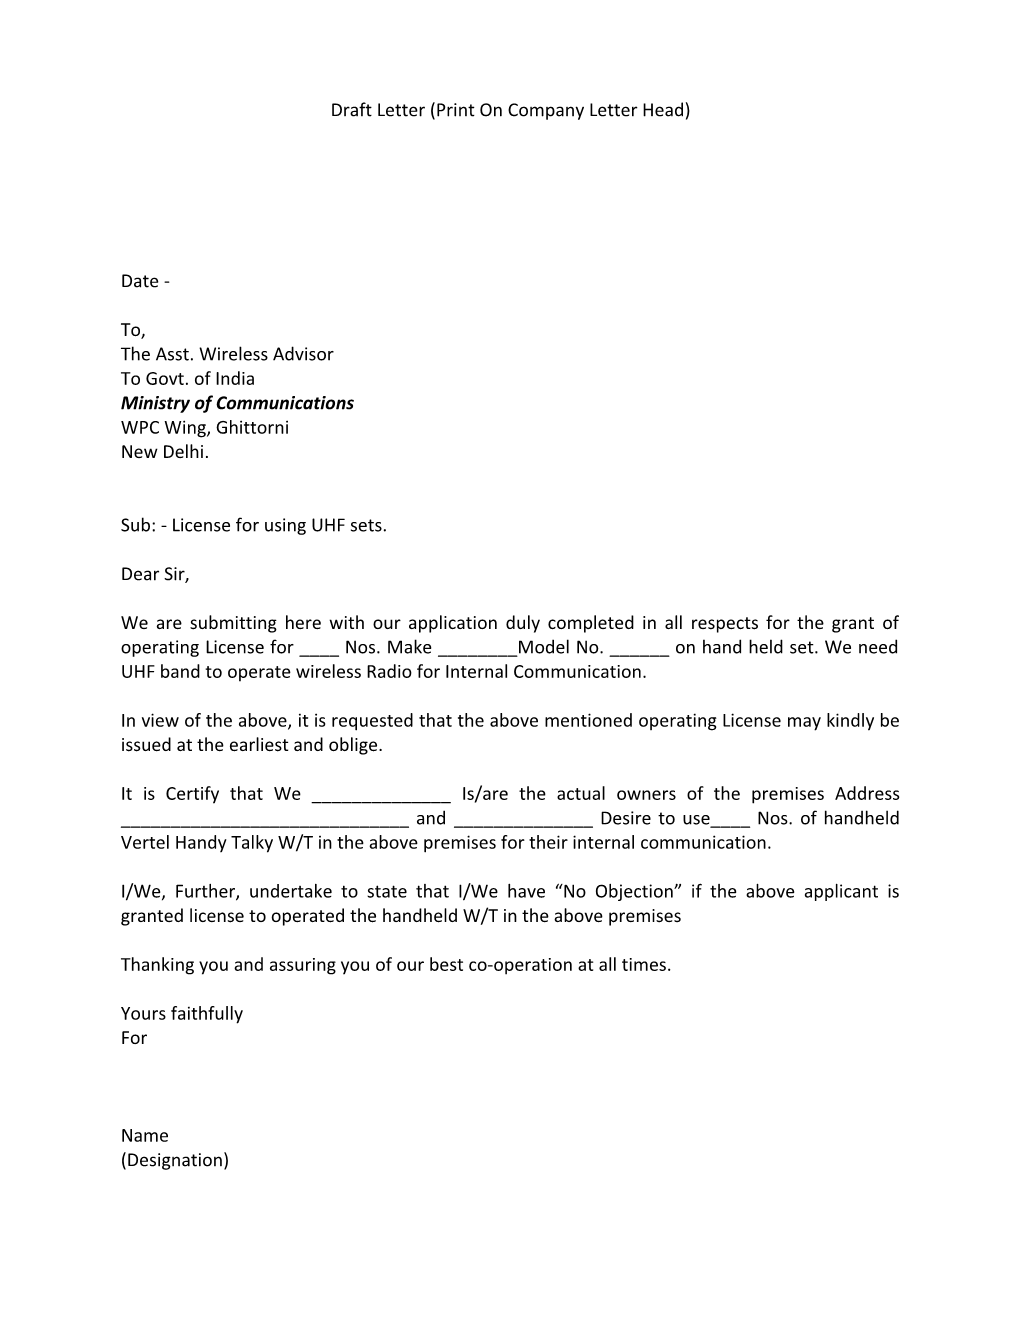 Draft Letter (Print on Company Letter Head)